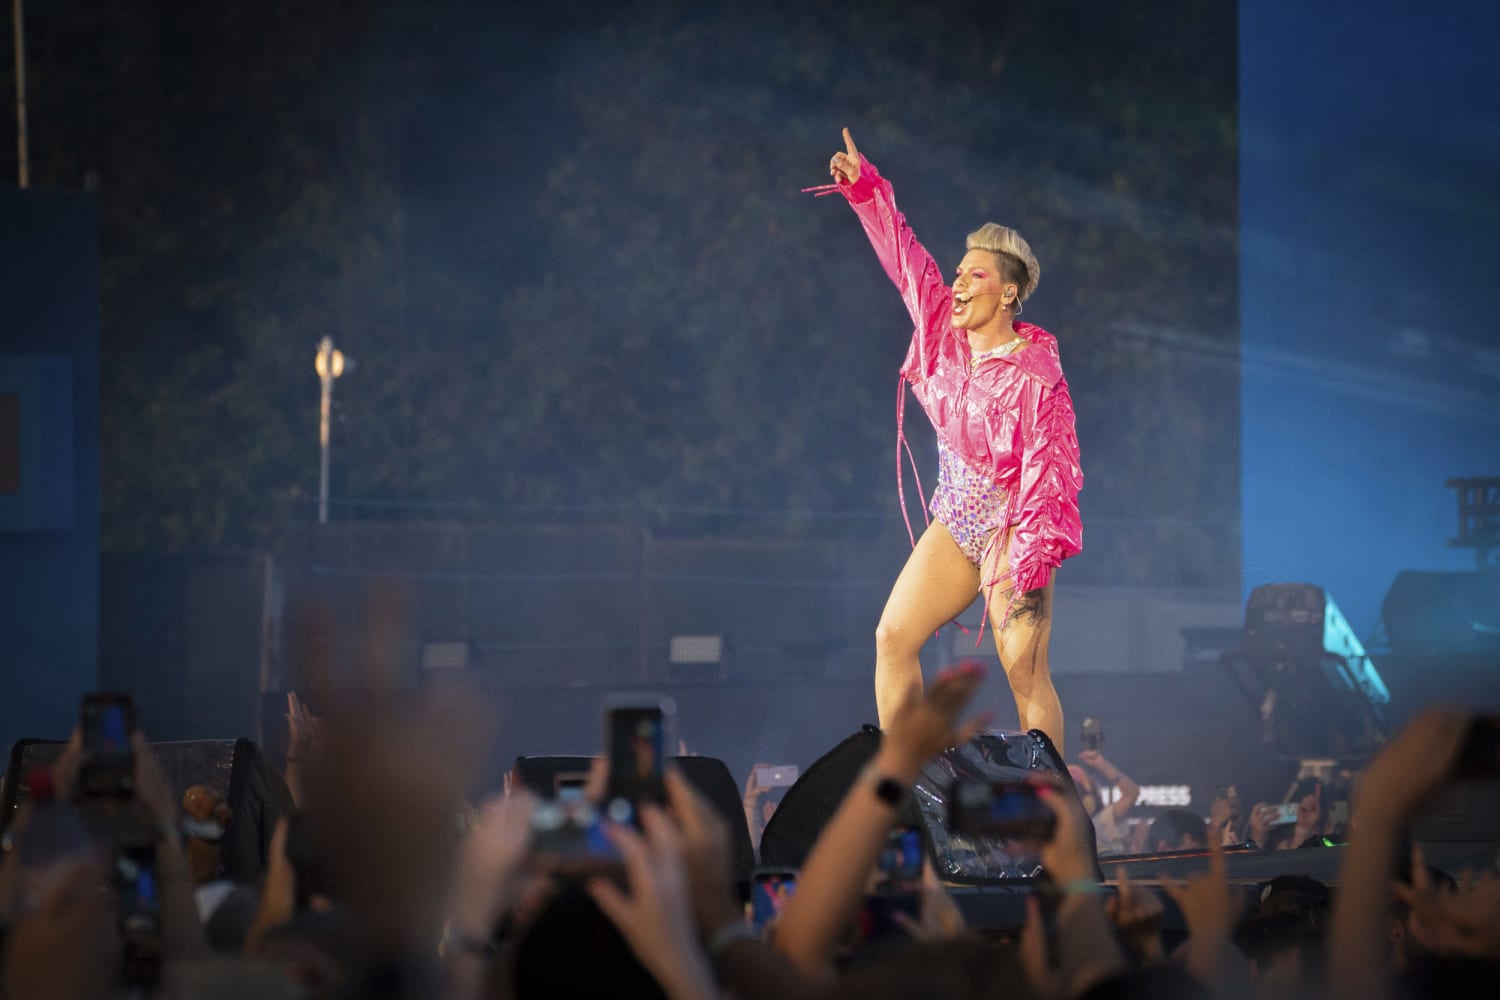 Concertgoer appears to throw ashes at Pink during performance